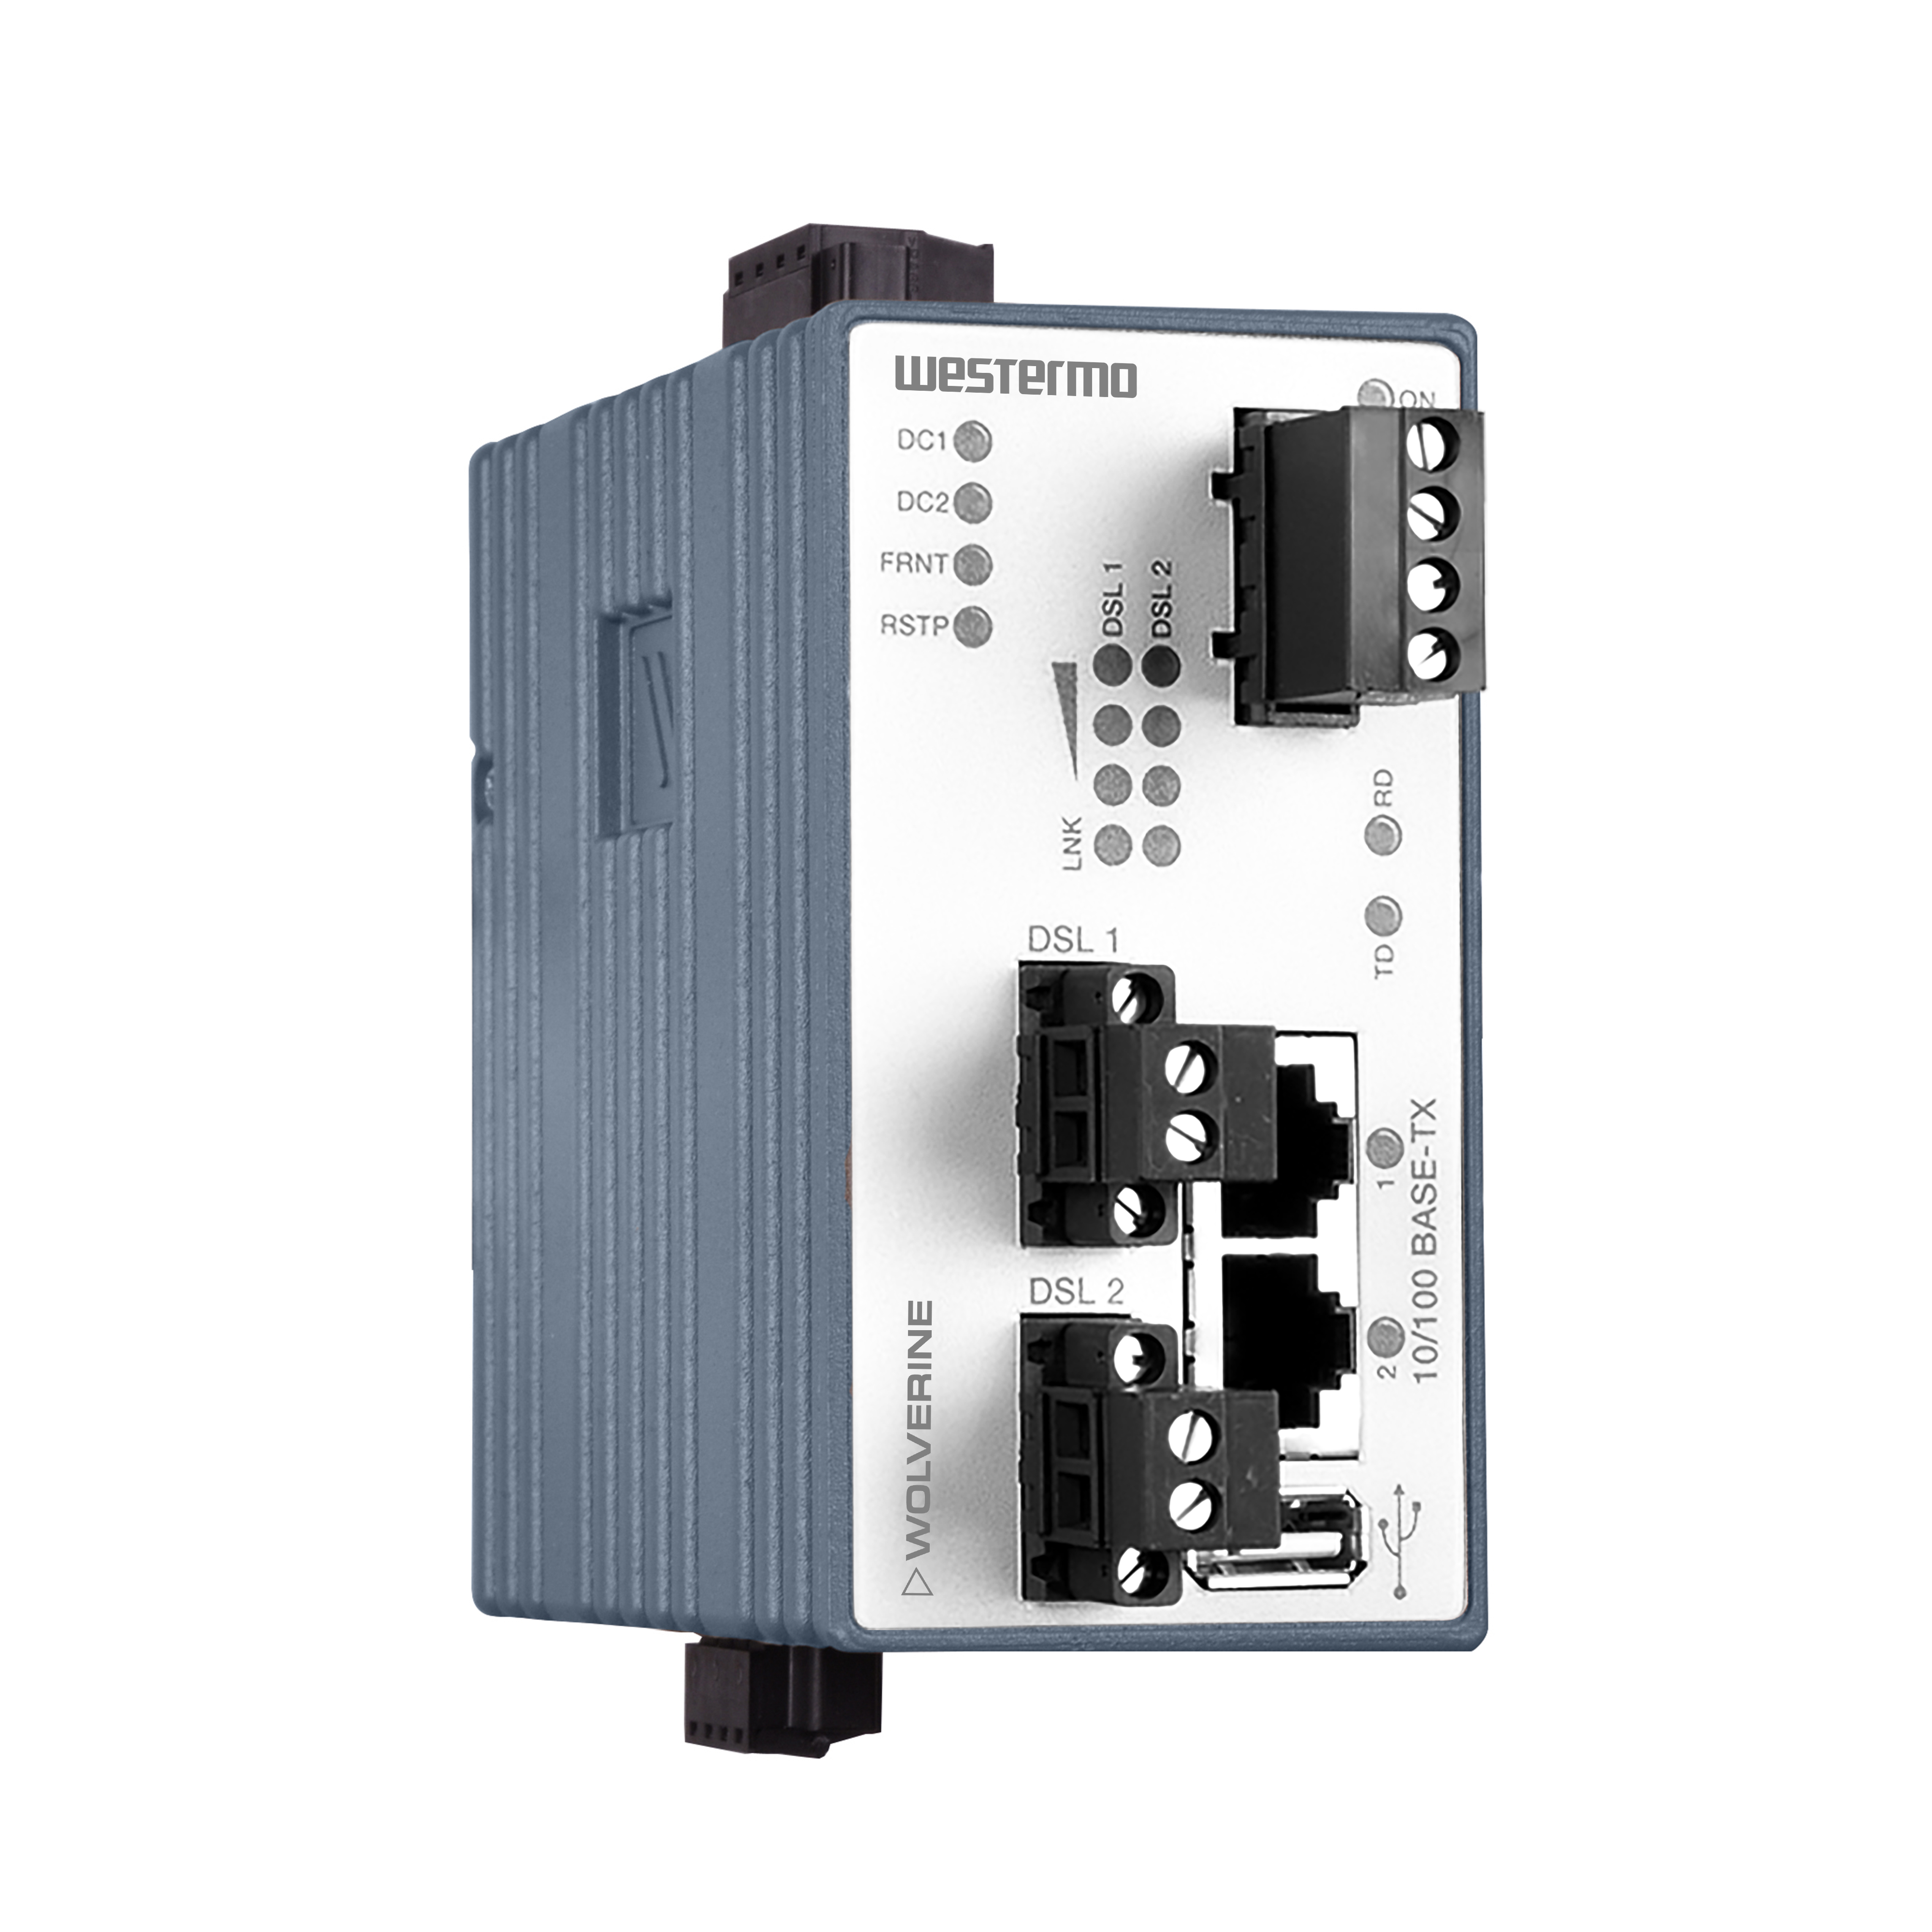 Industrial Ethernet Extender DDW-142-485 by Westermo.